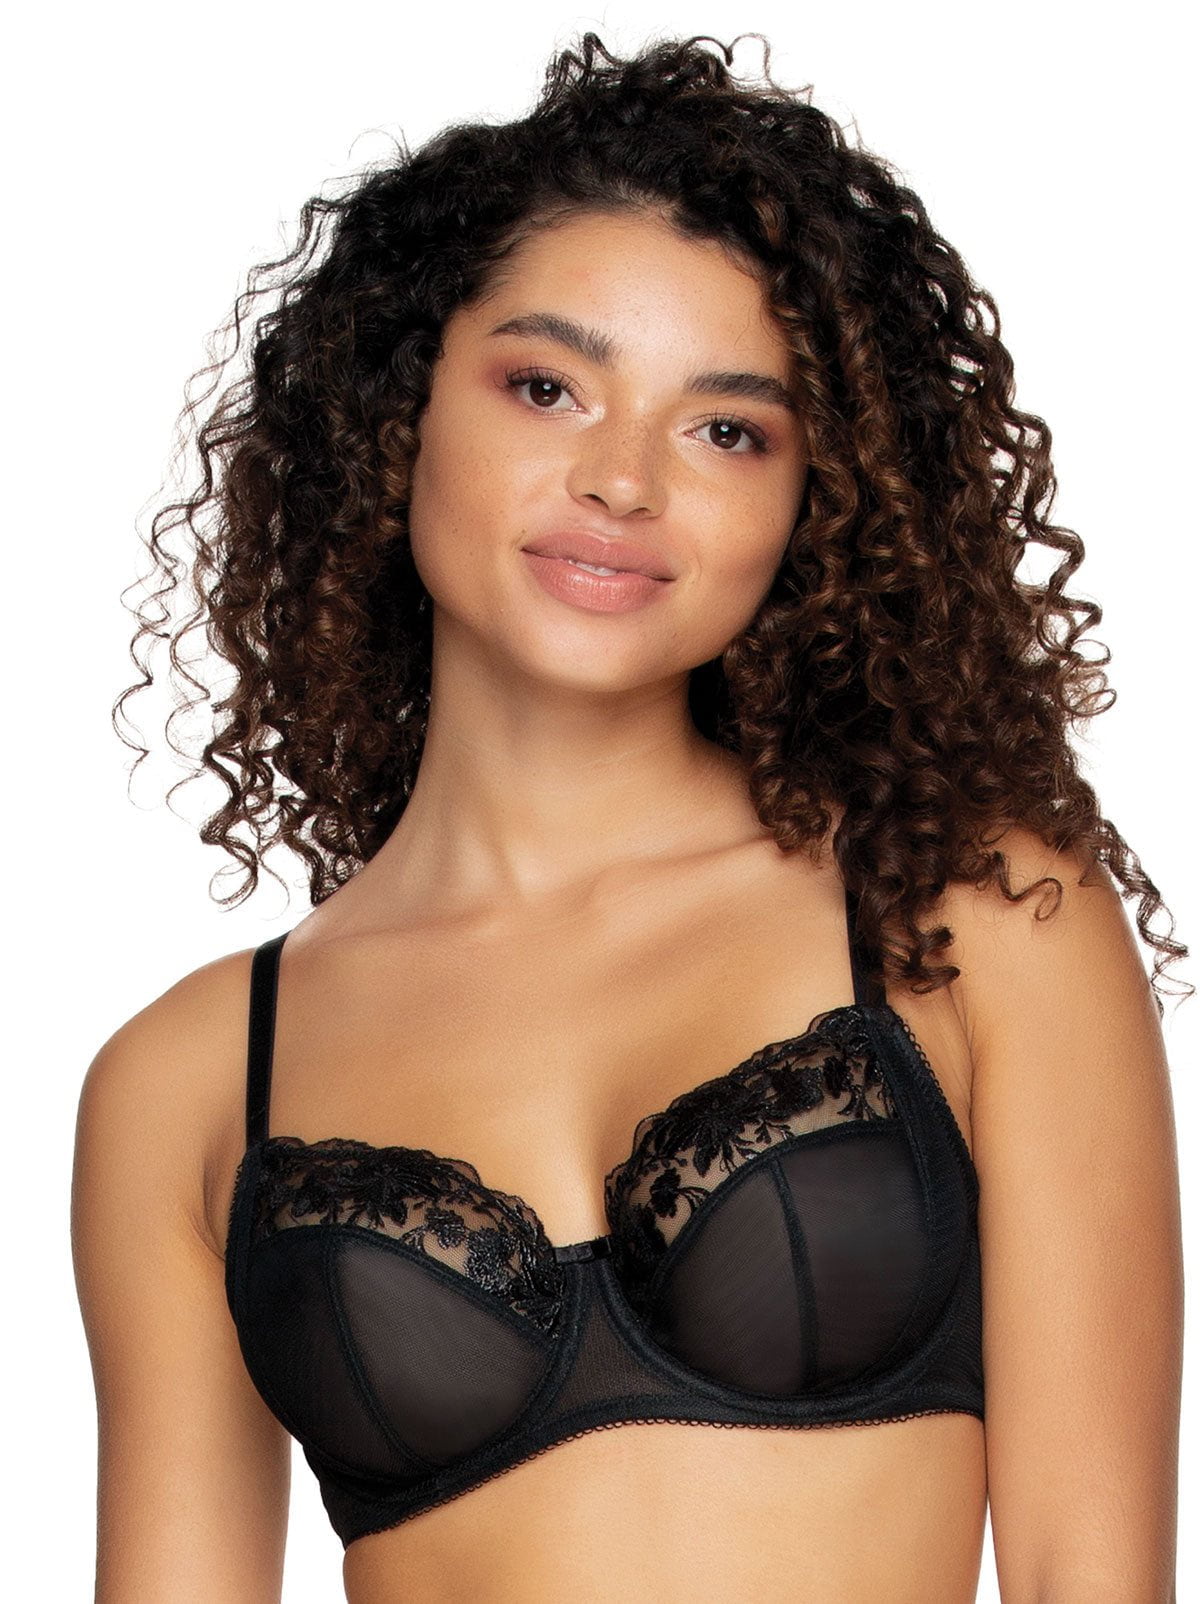 Paramour by Felina | Marvelous Side Smoothing T-Shirt Bra 2-Pack (Warm  Neutral, 42DD)